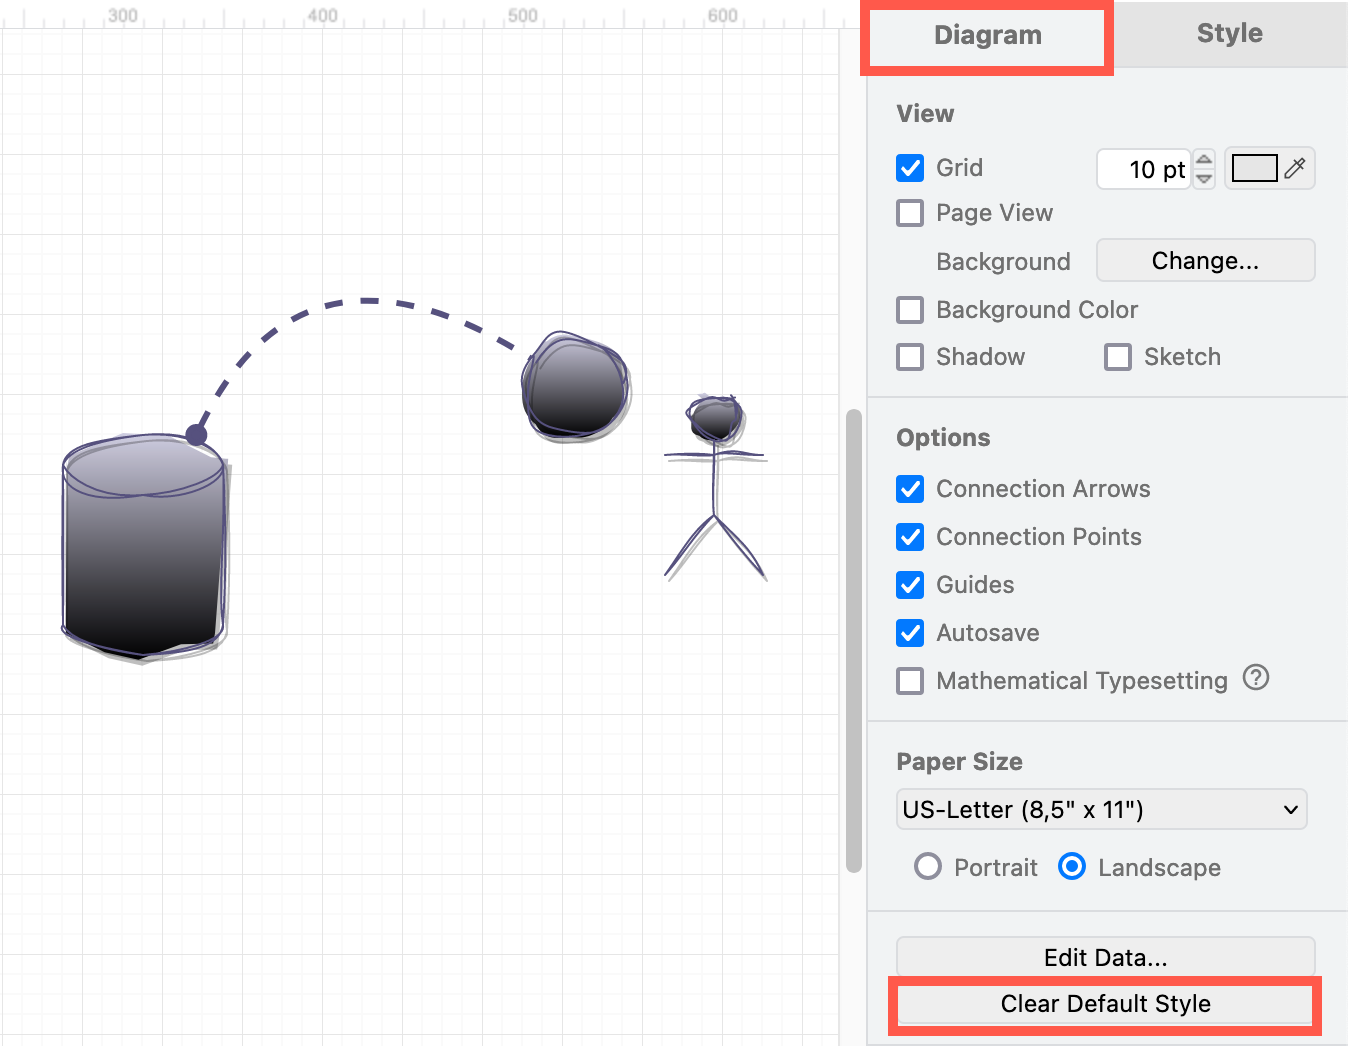 With nothing selected in your diagram, click on Clear Default Style to reset both the shape and connector default styles